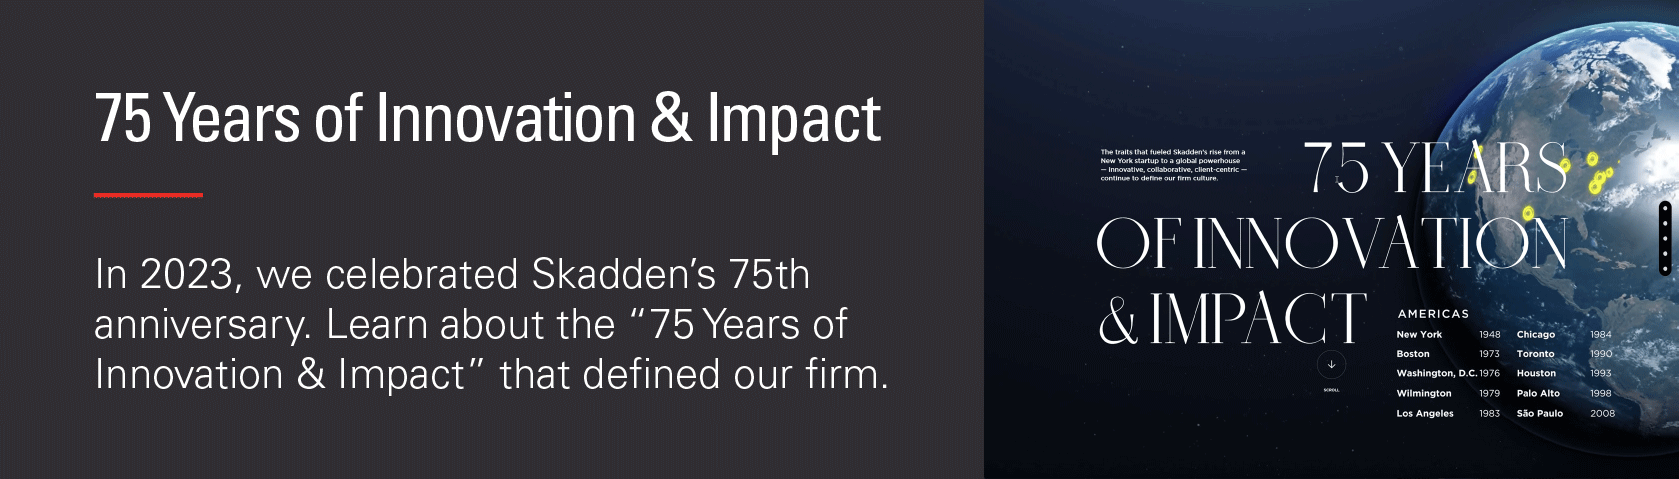 75th  Years of Innovation & Impact - in 2023, we celebrated Skadden's 75 anniversary. Learn about the "75 Years of Innovation & Impact" that defined our firm.